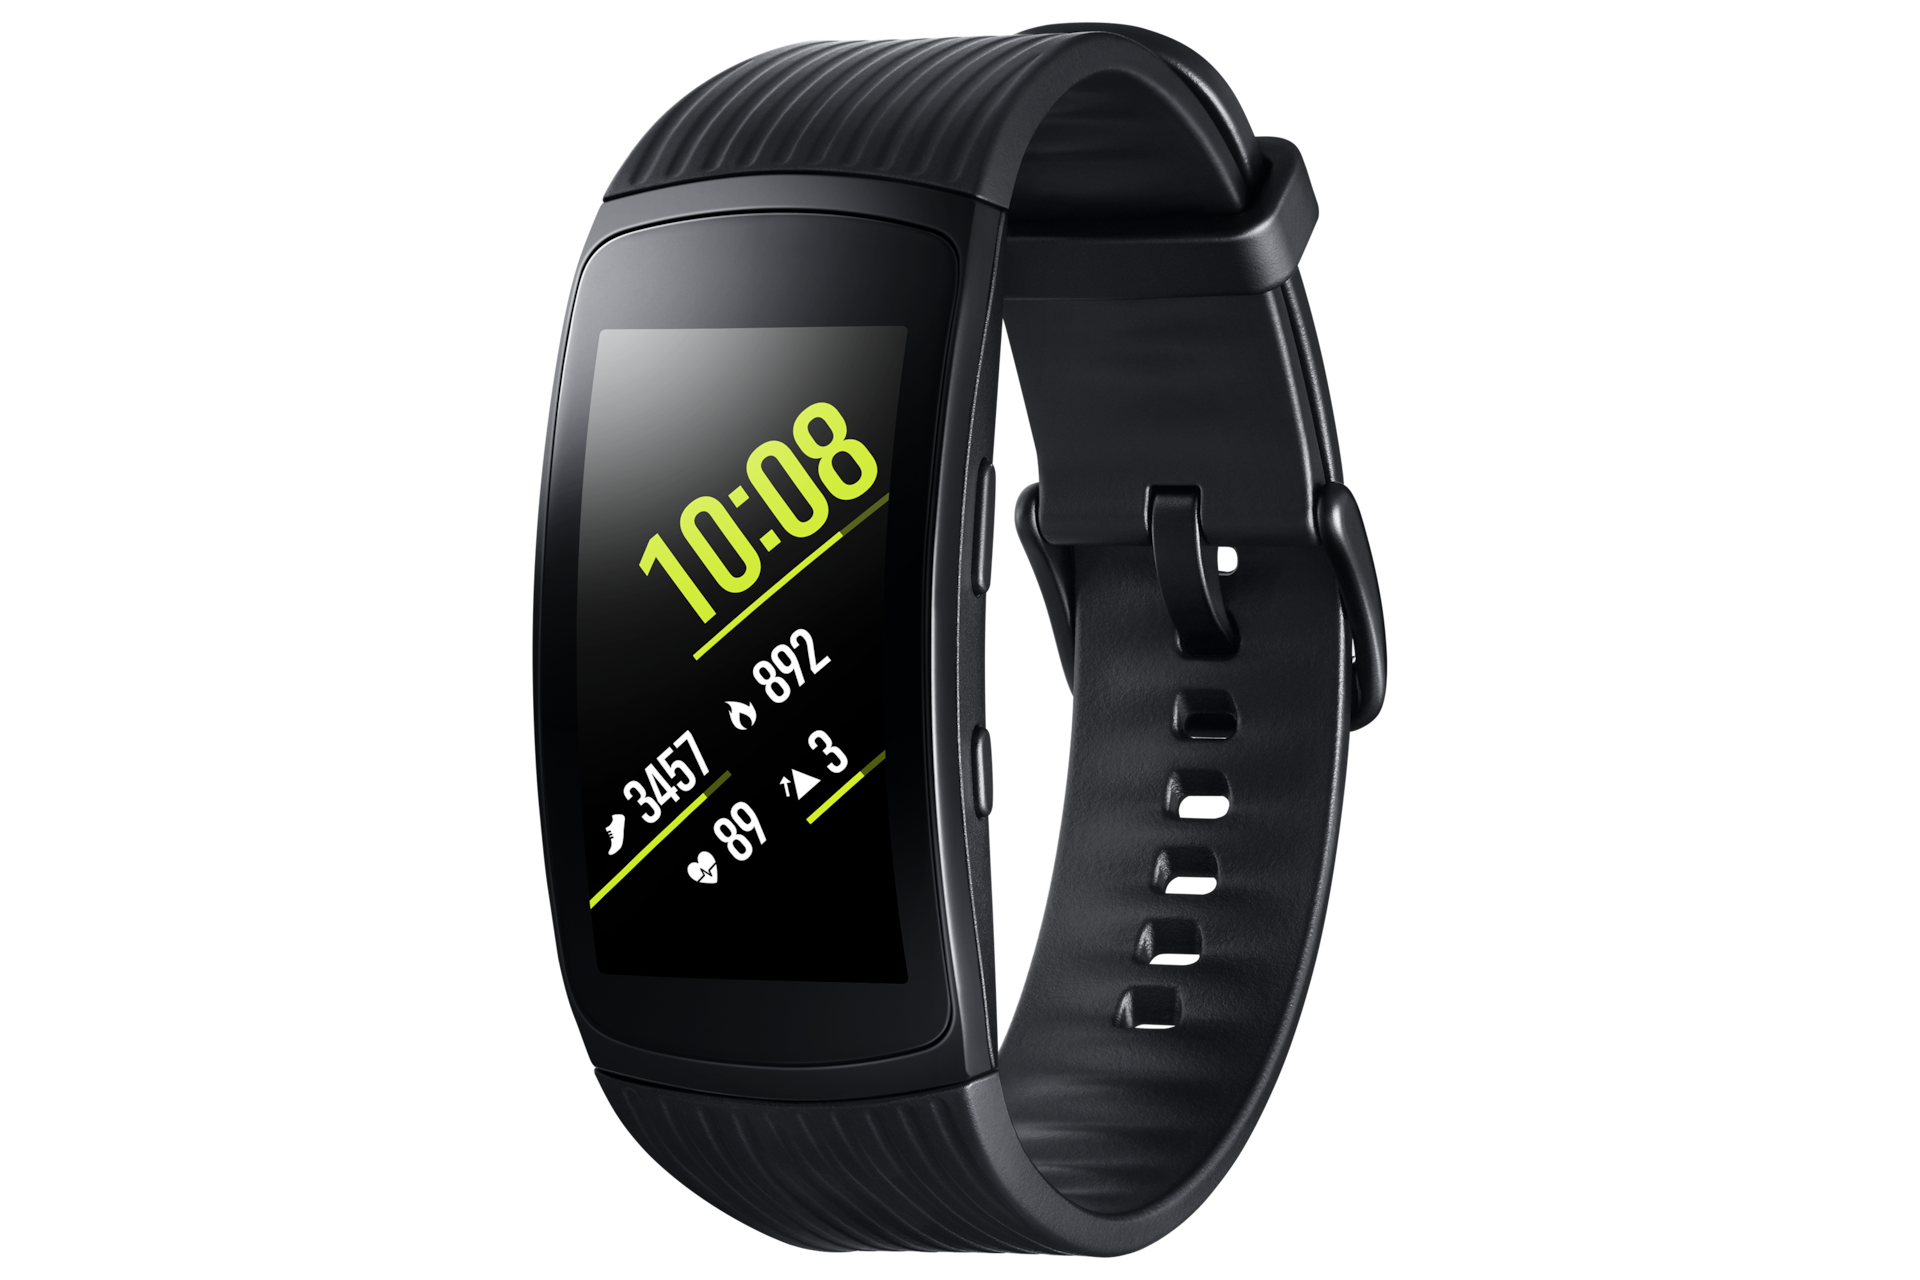 gear fit pro 2 price